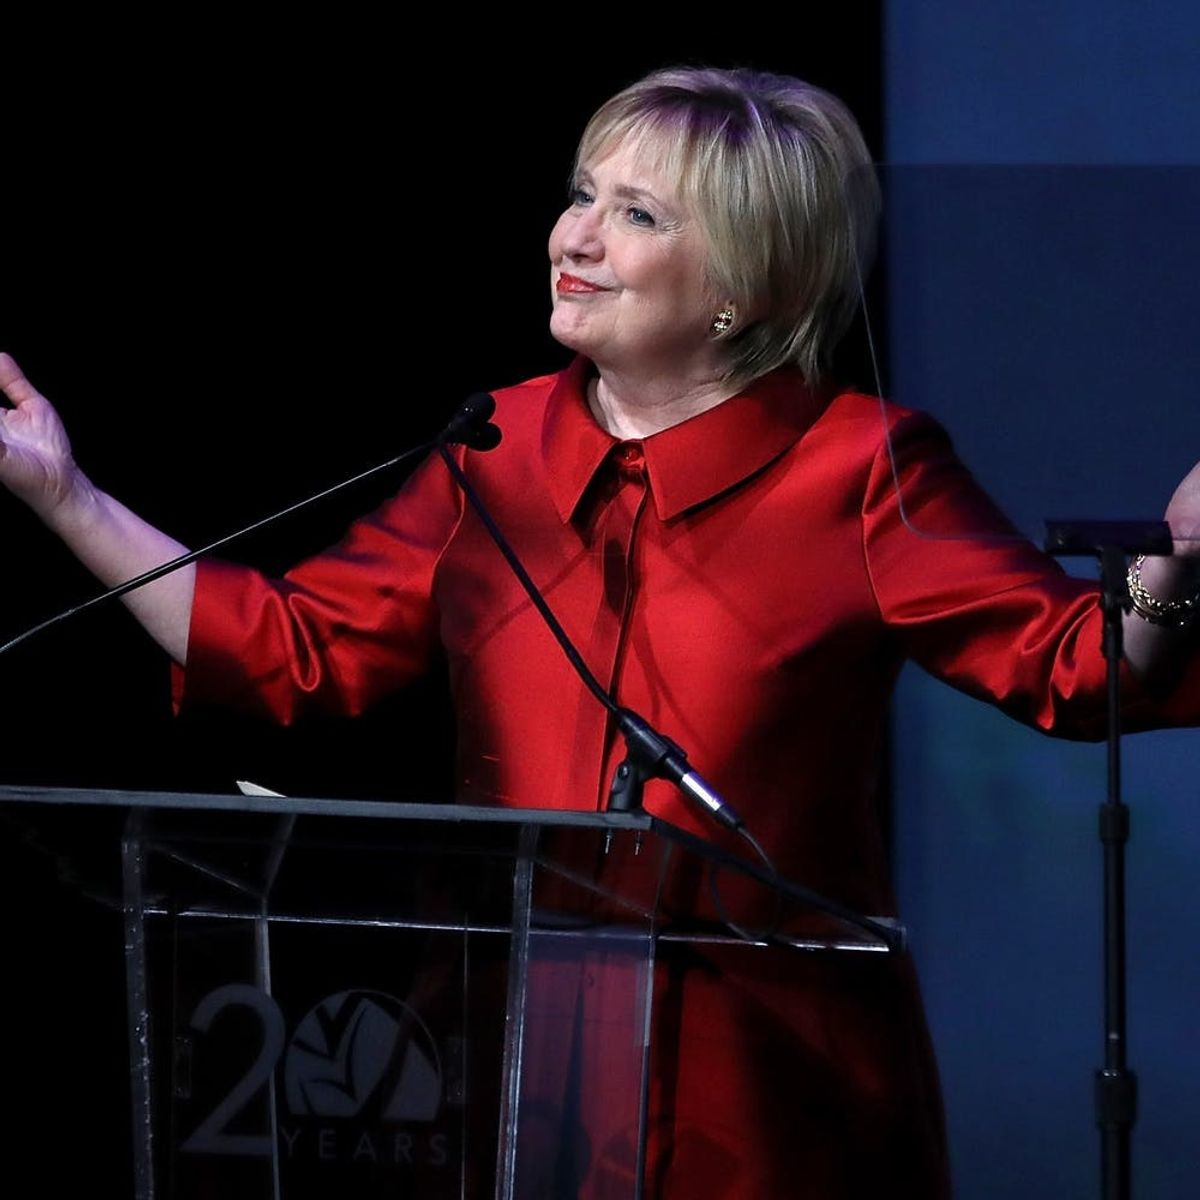 ‘Vanity Fair’ Has Backtracked After Hillary Clinton “Knitting” Controversy